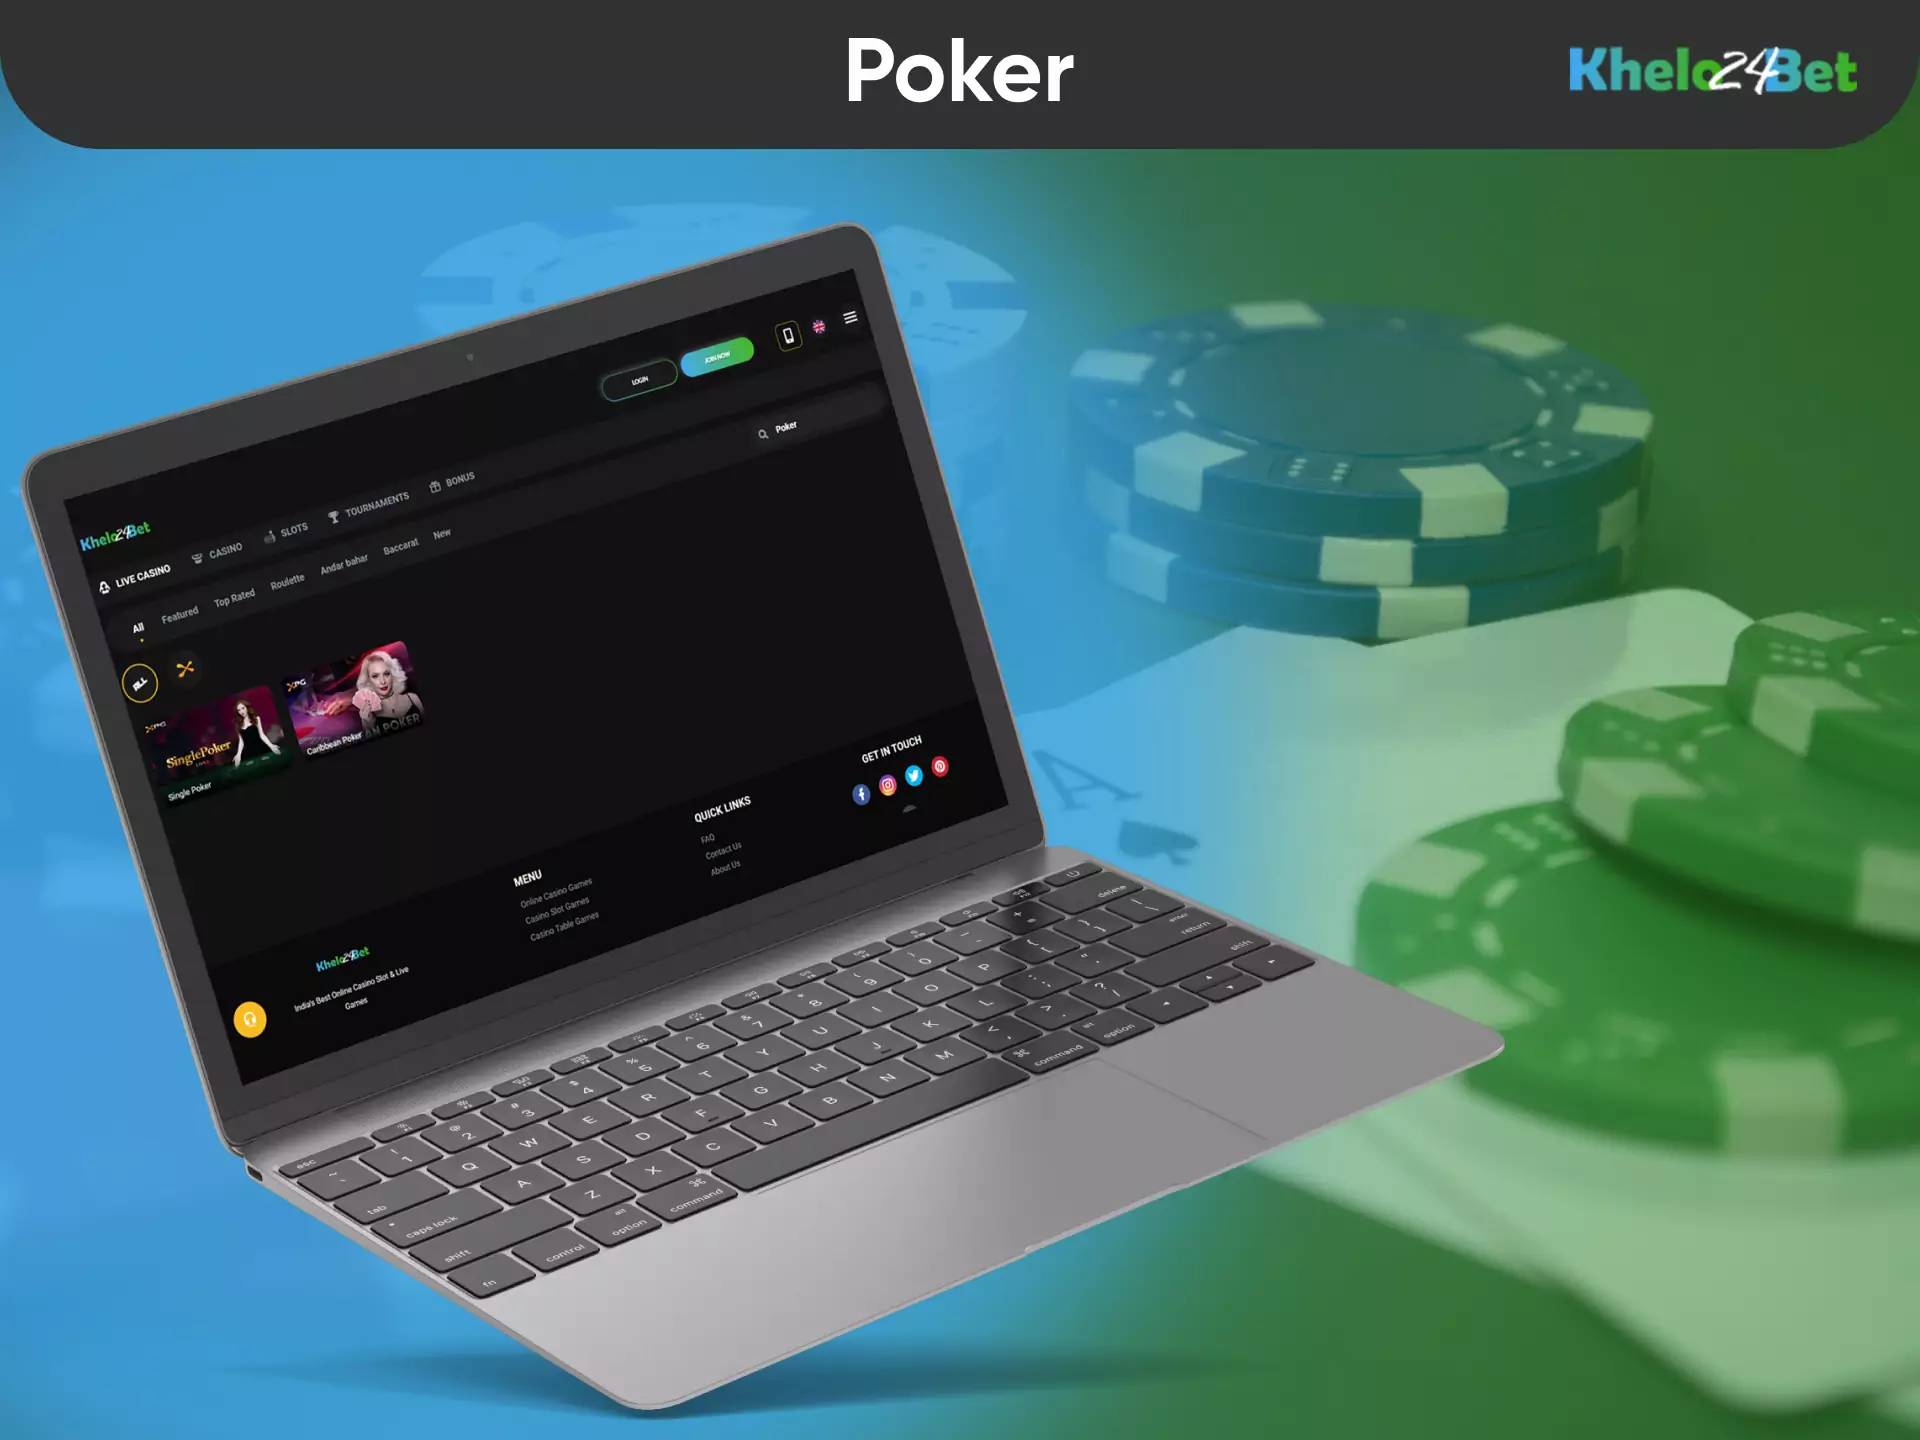 In the Khelo24bet Casino, you can play online poker with live dealers.